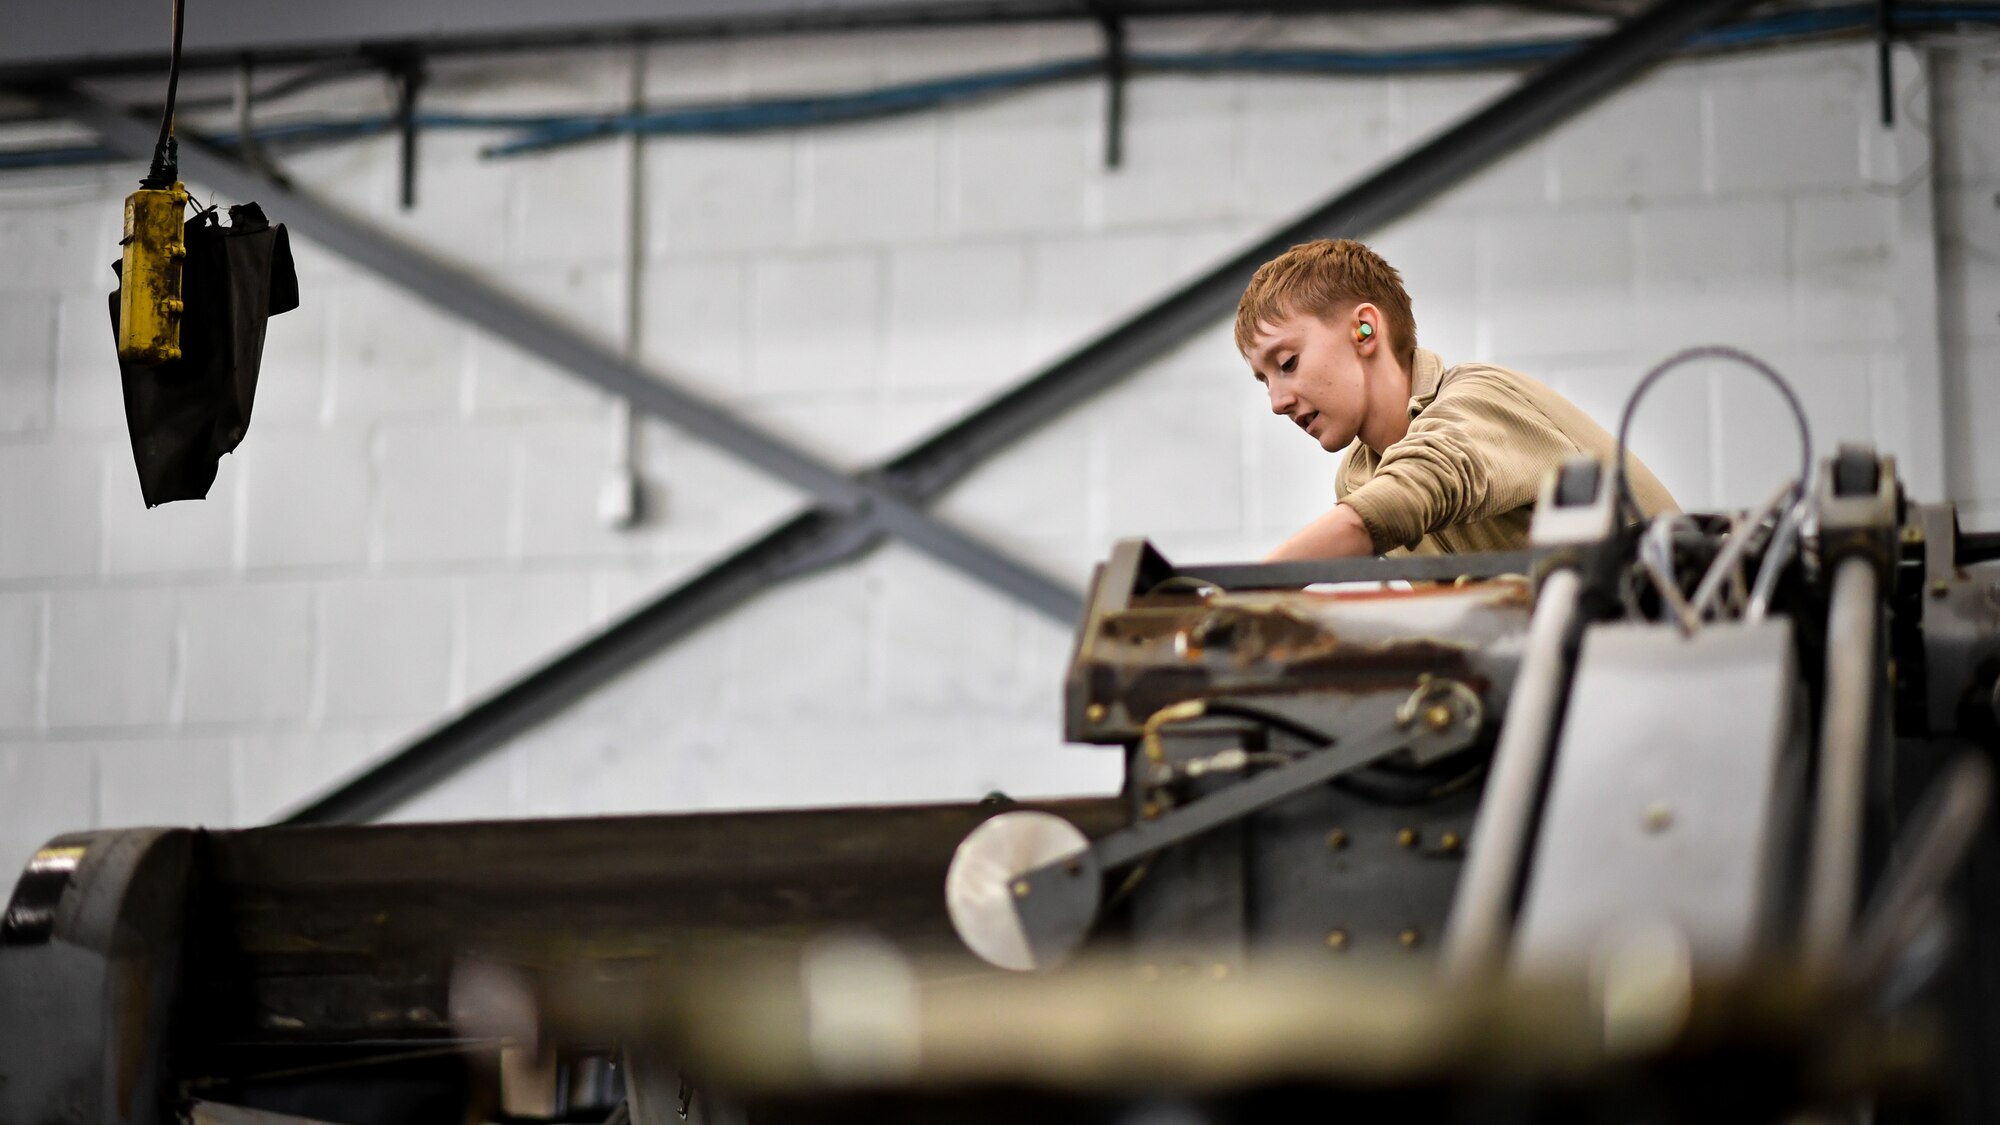 Airman Abigail Weber, 2nd Maintenance Squadron aerospace ground equipment technician, starts a bomb loader vehicle after an engine oil change at Barksdale Air Force Base, La., Feb. 27, 2018. Weber started the vehicle as the last step of the oil change process to verify the vehicle is ready for daily operations.